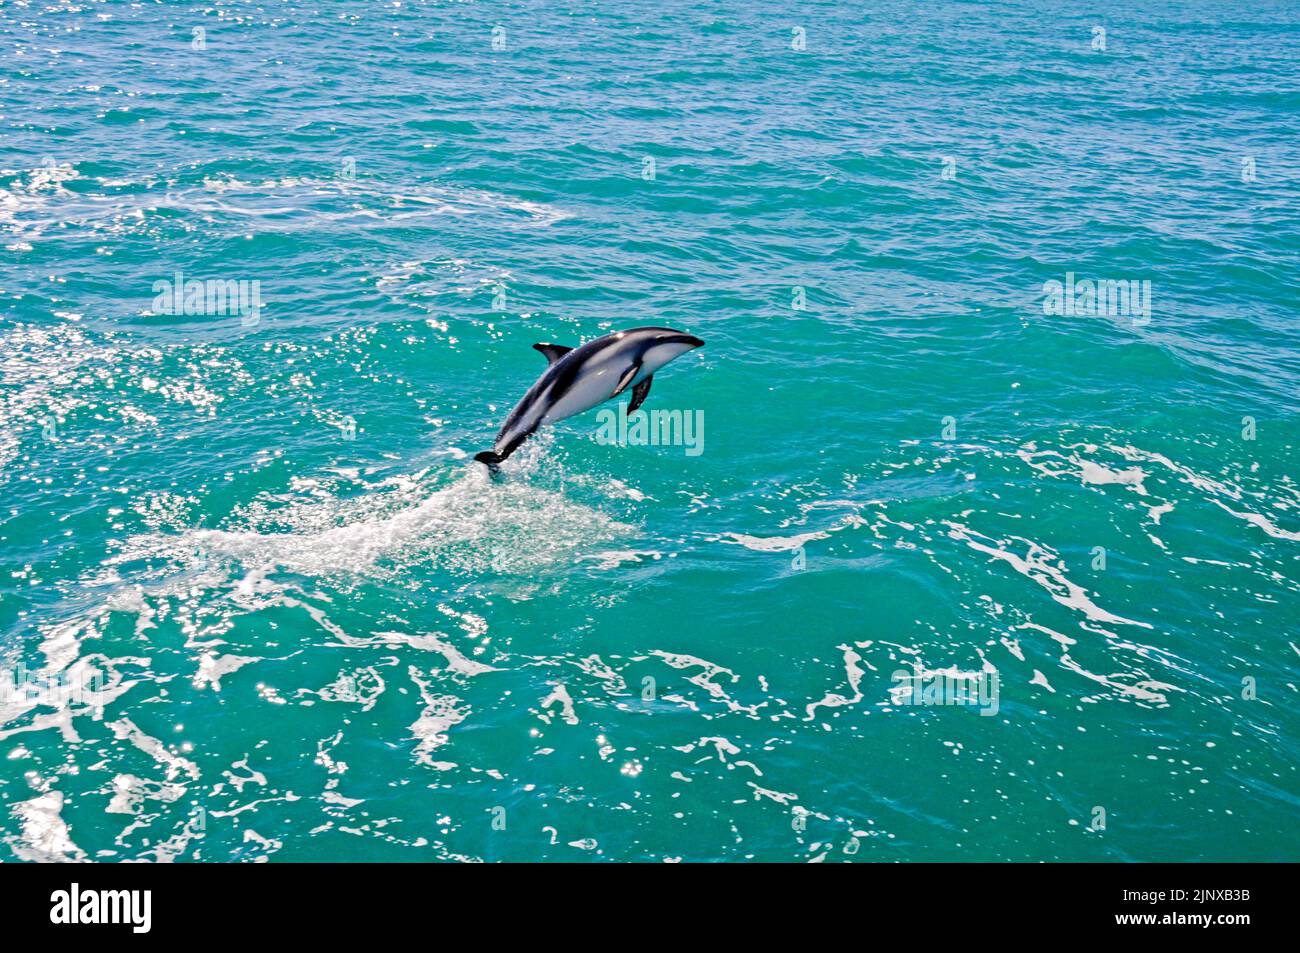 A Dusky dolphin (Lagenorhynchus obscurus) performing its remarkable acrobatics. The Dusky dolphin is the most lively dolphin in the world and can be seen Stock Photo